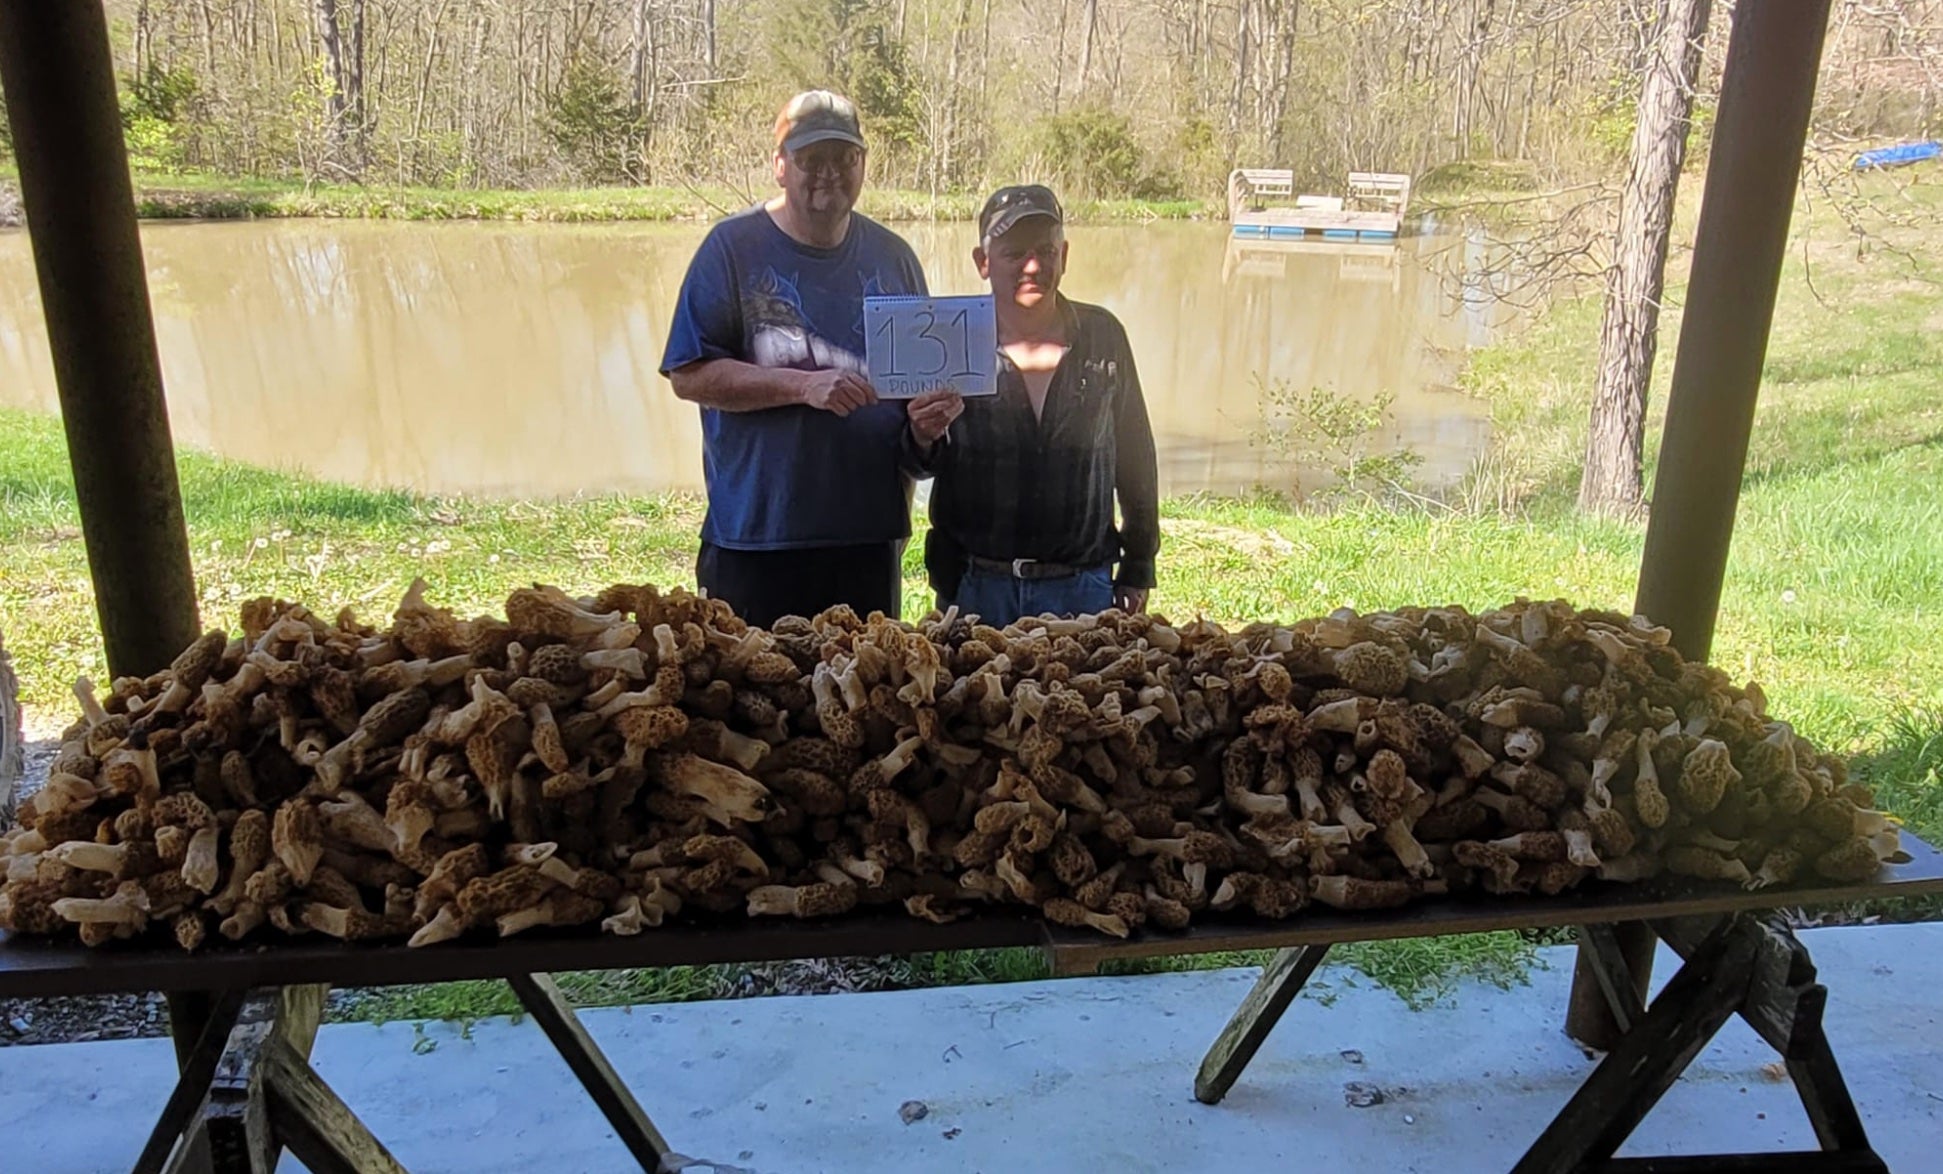 Two Iowa Men Find Nearly 200 Pounds of Morels